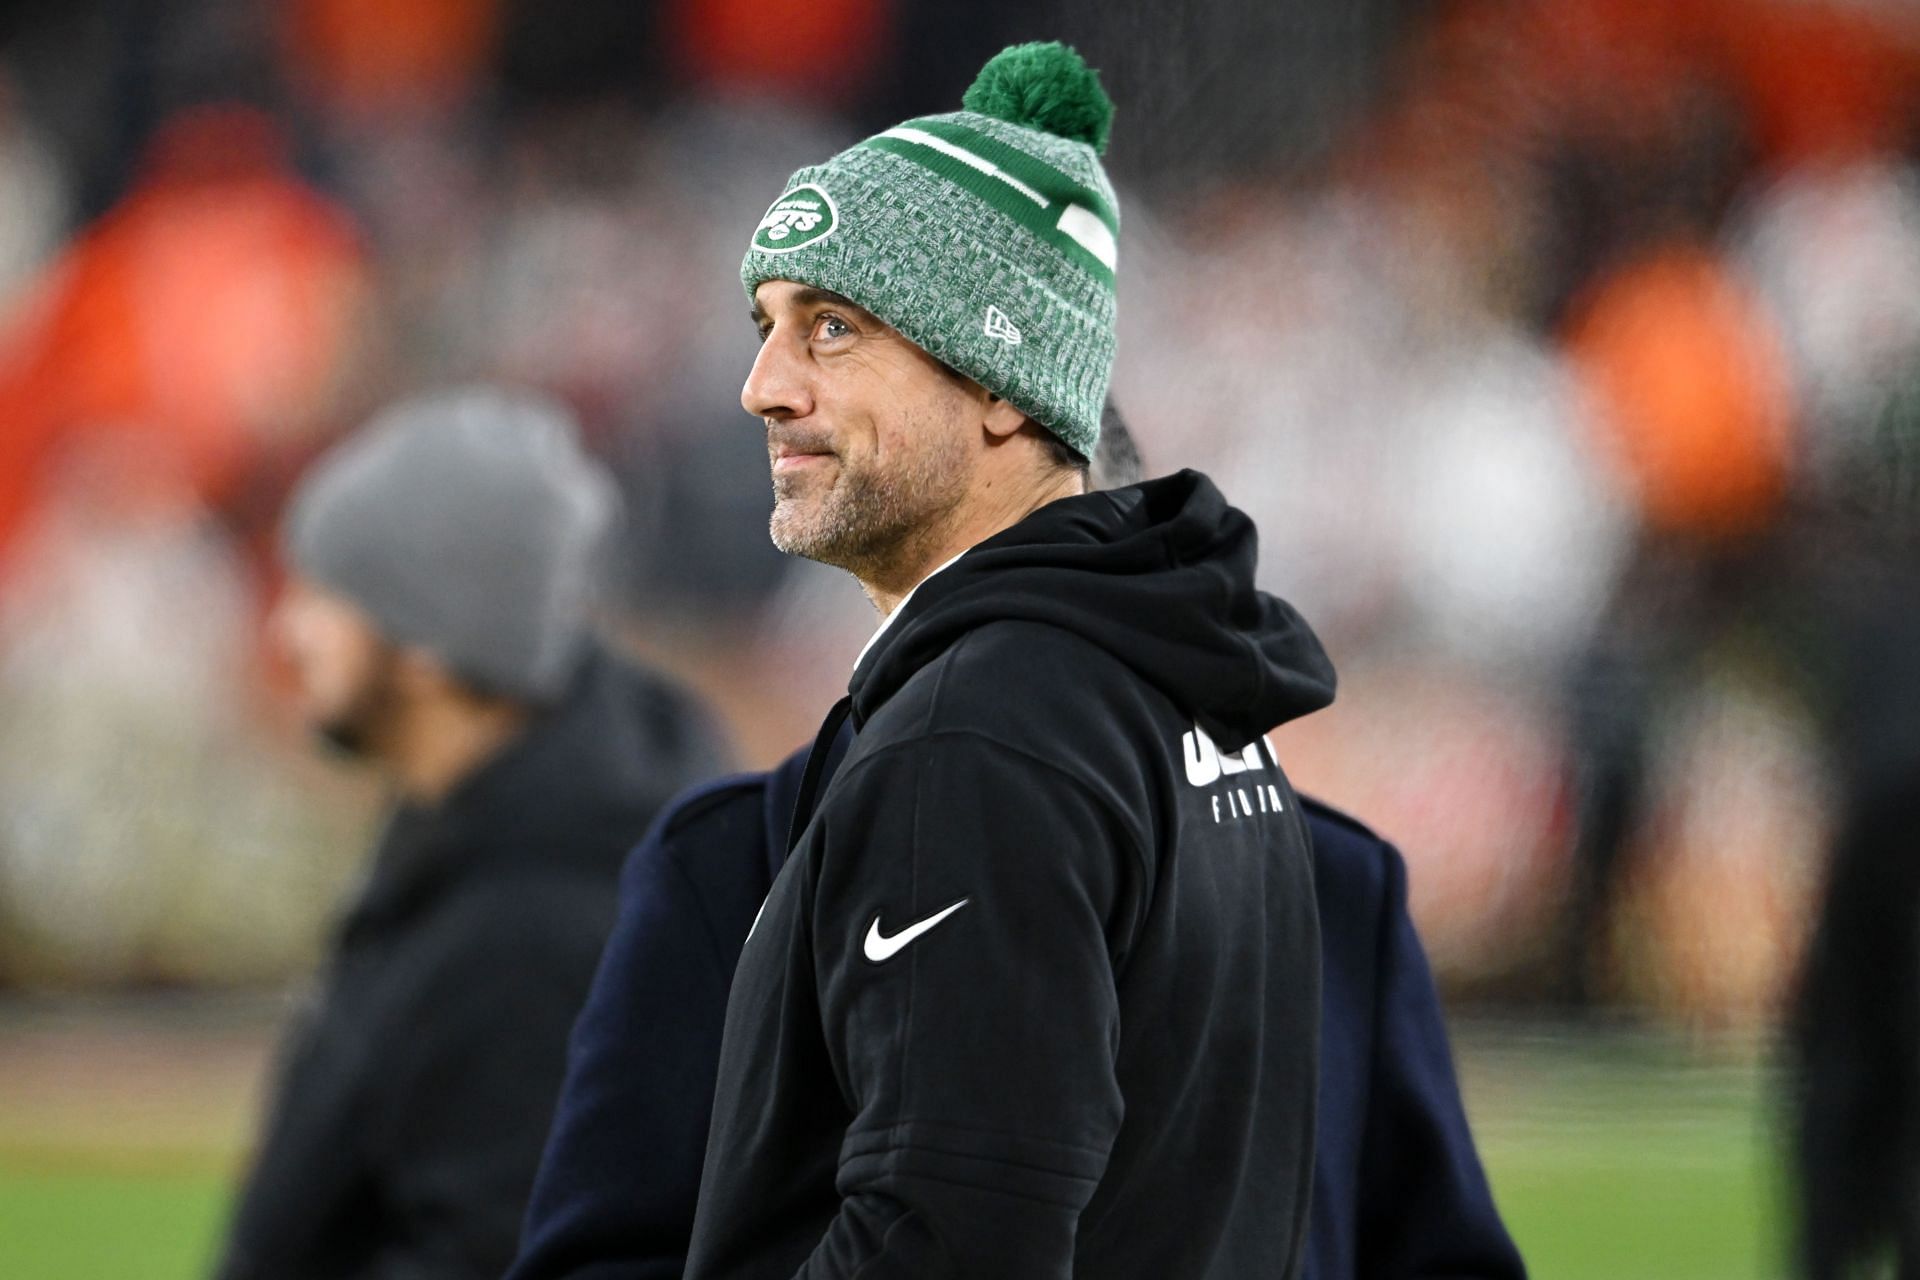 Aaron Rodgers during New York Jets vs. Cleveland Browns